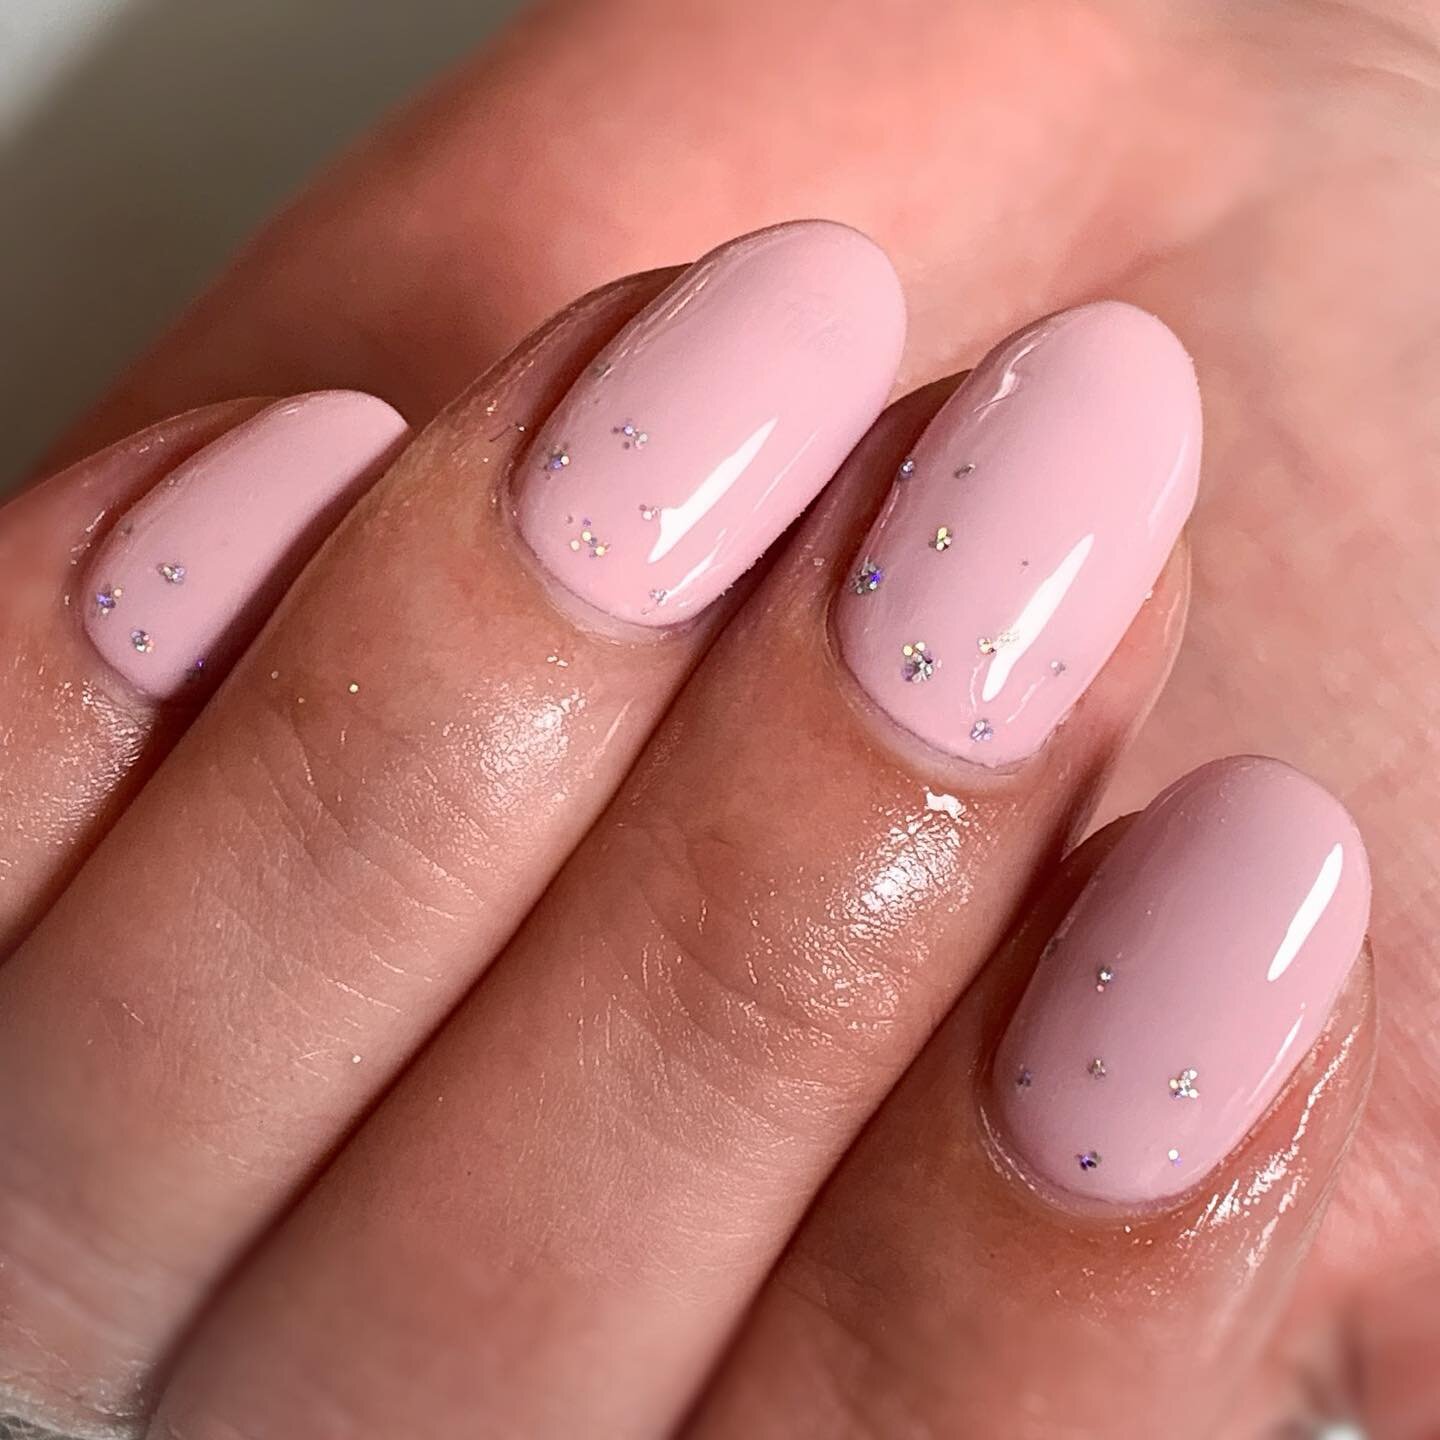 Dainty drops of sparkle to catch the last of the sun rays ✨☀️ 

#thegelbottle #prettynails #pinknails #glitternails #cheadle #didsbury #manchester #manchesternails #manchesternailtech